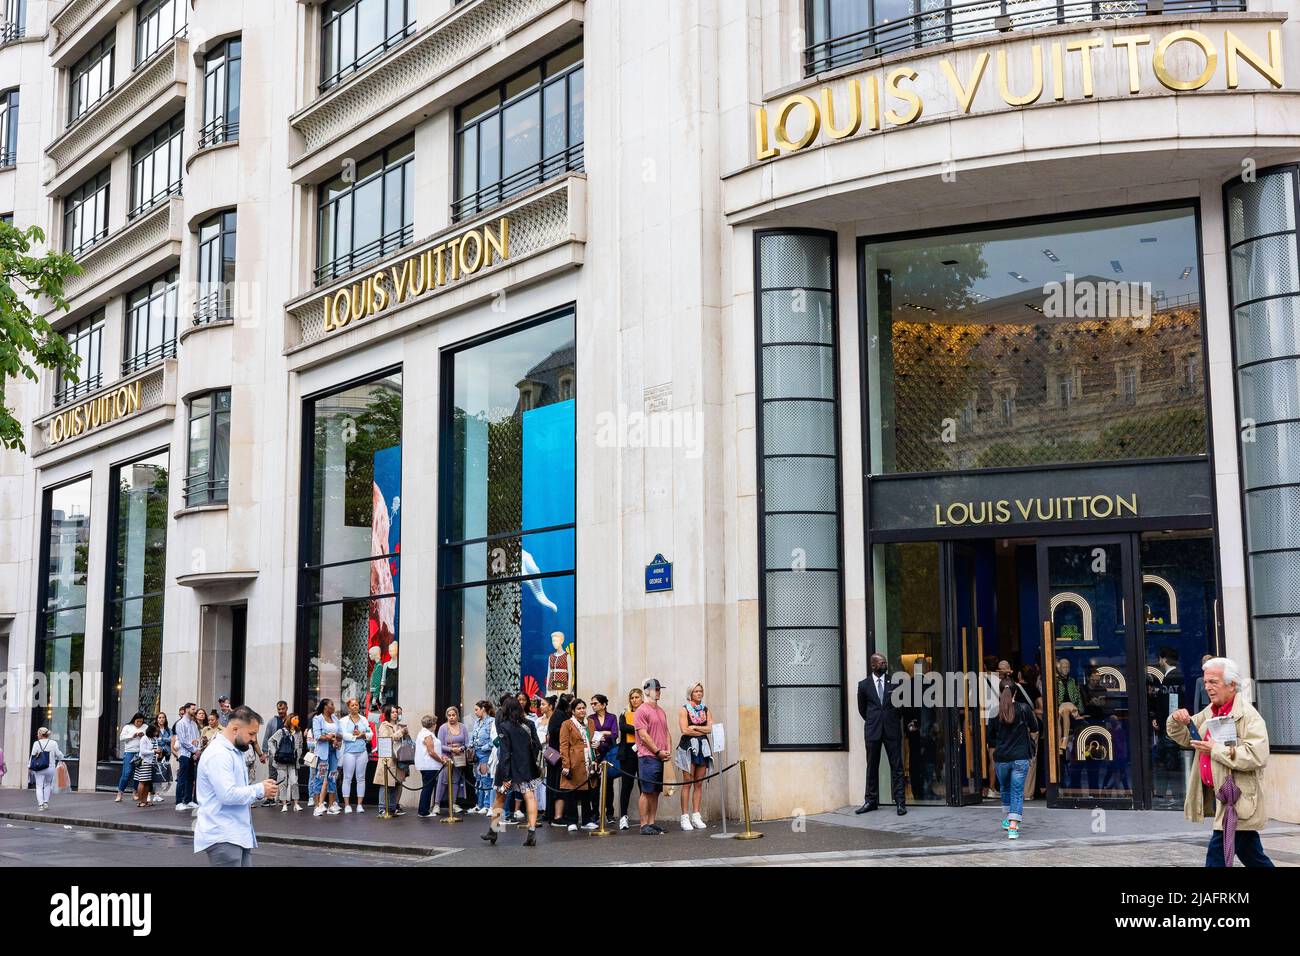 Louis Vuitton Fashion Luxury Store In Champs Elysees People Passing In Paris  France Stock Photo - Download Image Now - iStock